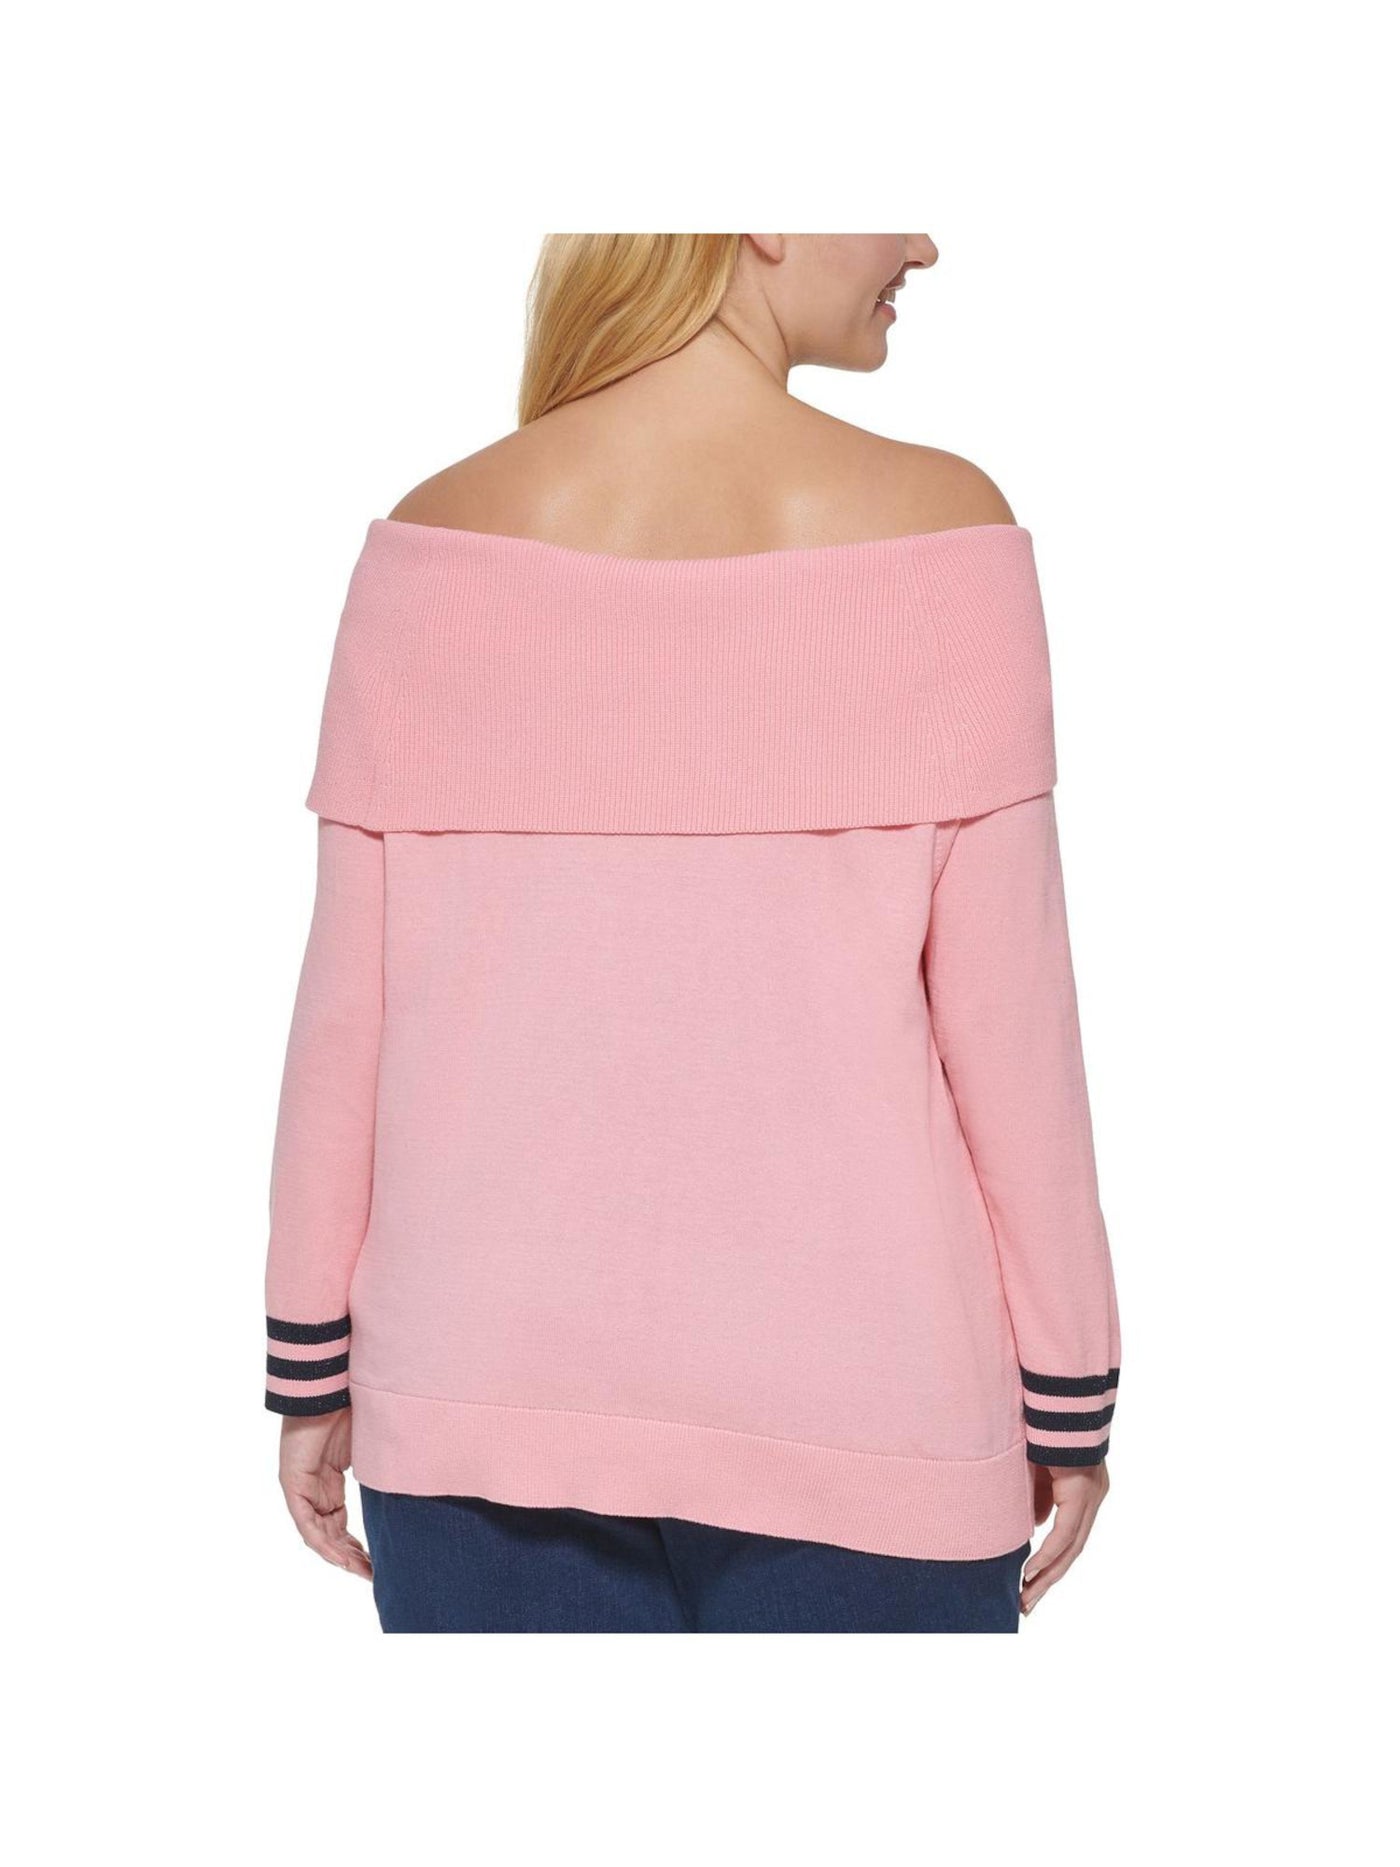 TOMMY HILFIGER Womens Pink Knit Glitter Ribbed Embroidered Logo Striped Long Sleeve Off Shoulder Sweater Plus 3X